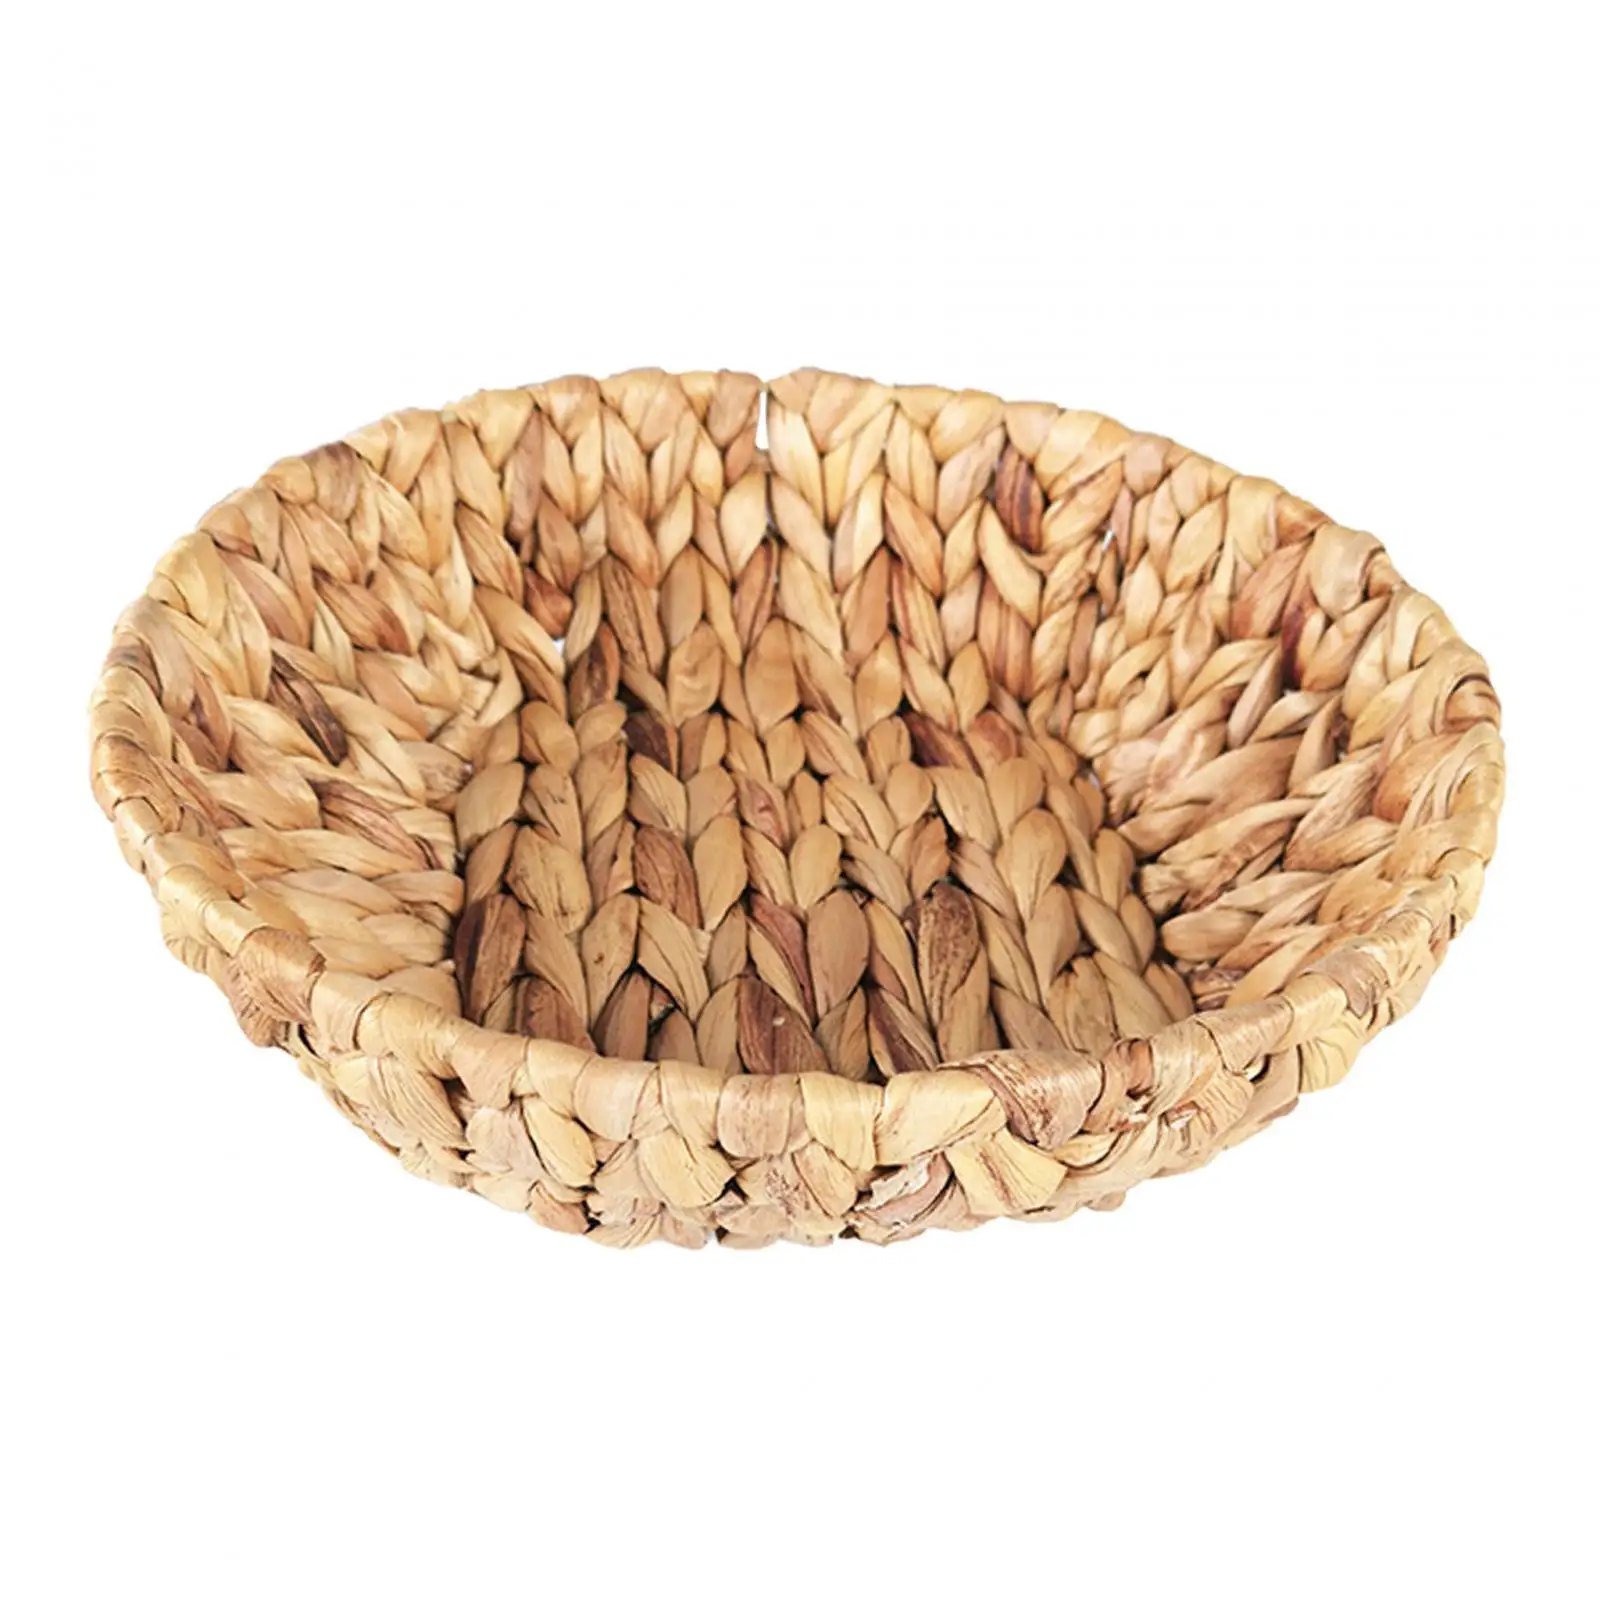 Snack Candy Storage Basket Woven Seagrass Tray Wicker Serving Tray for Fruit Dinner Bread Vegetable